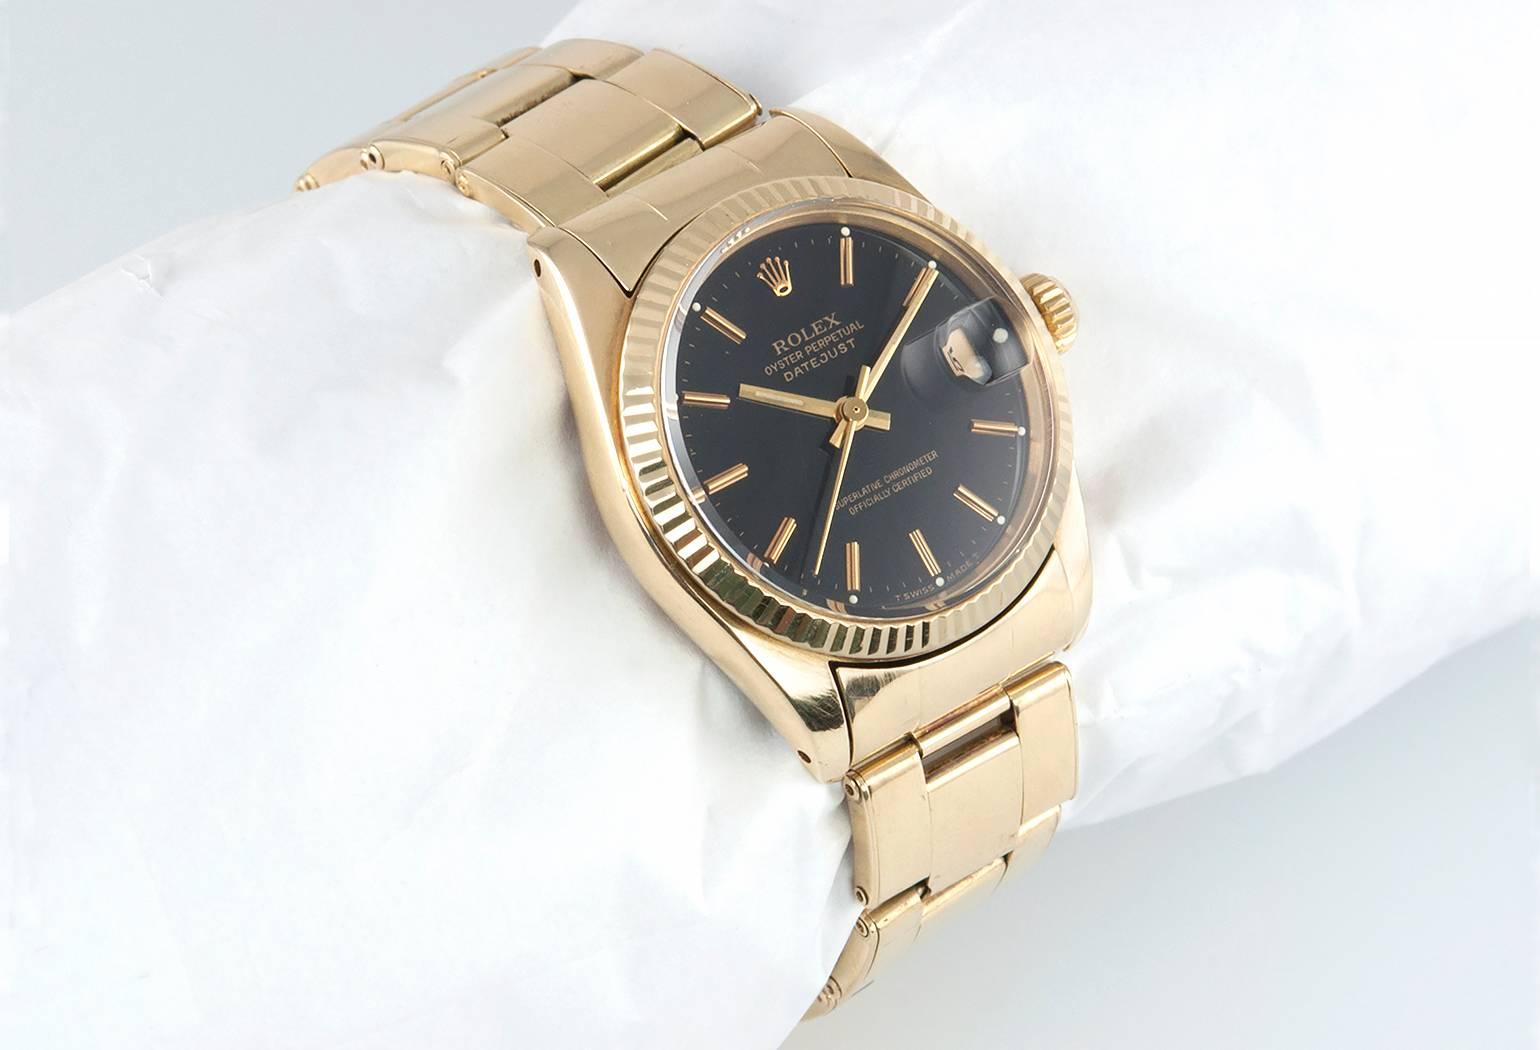 Rolex Midsize Yellow Gold Black Dial DateJust Wristwatch Ref 6827 In Excellent Condition For Sale In Los Angeles, CA